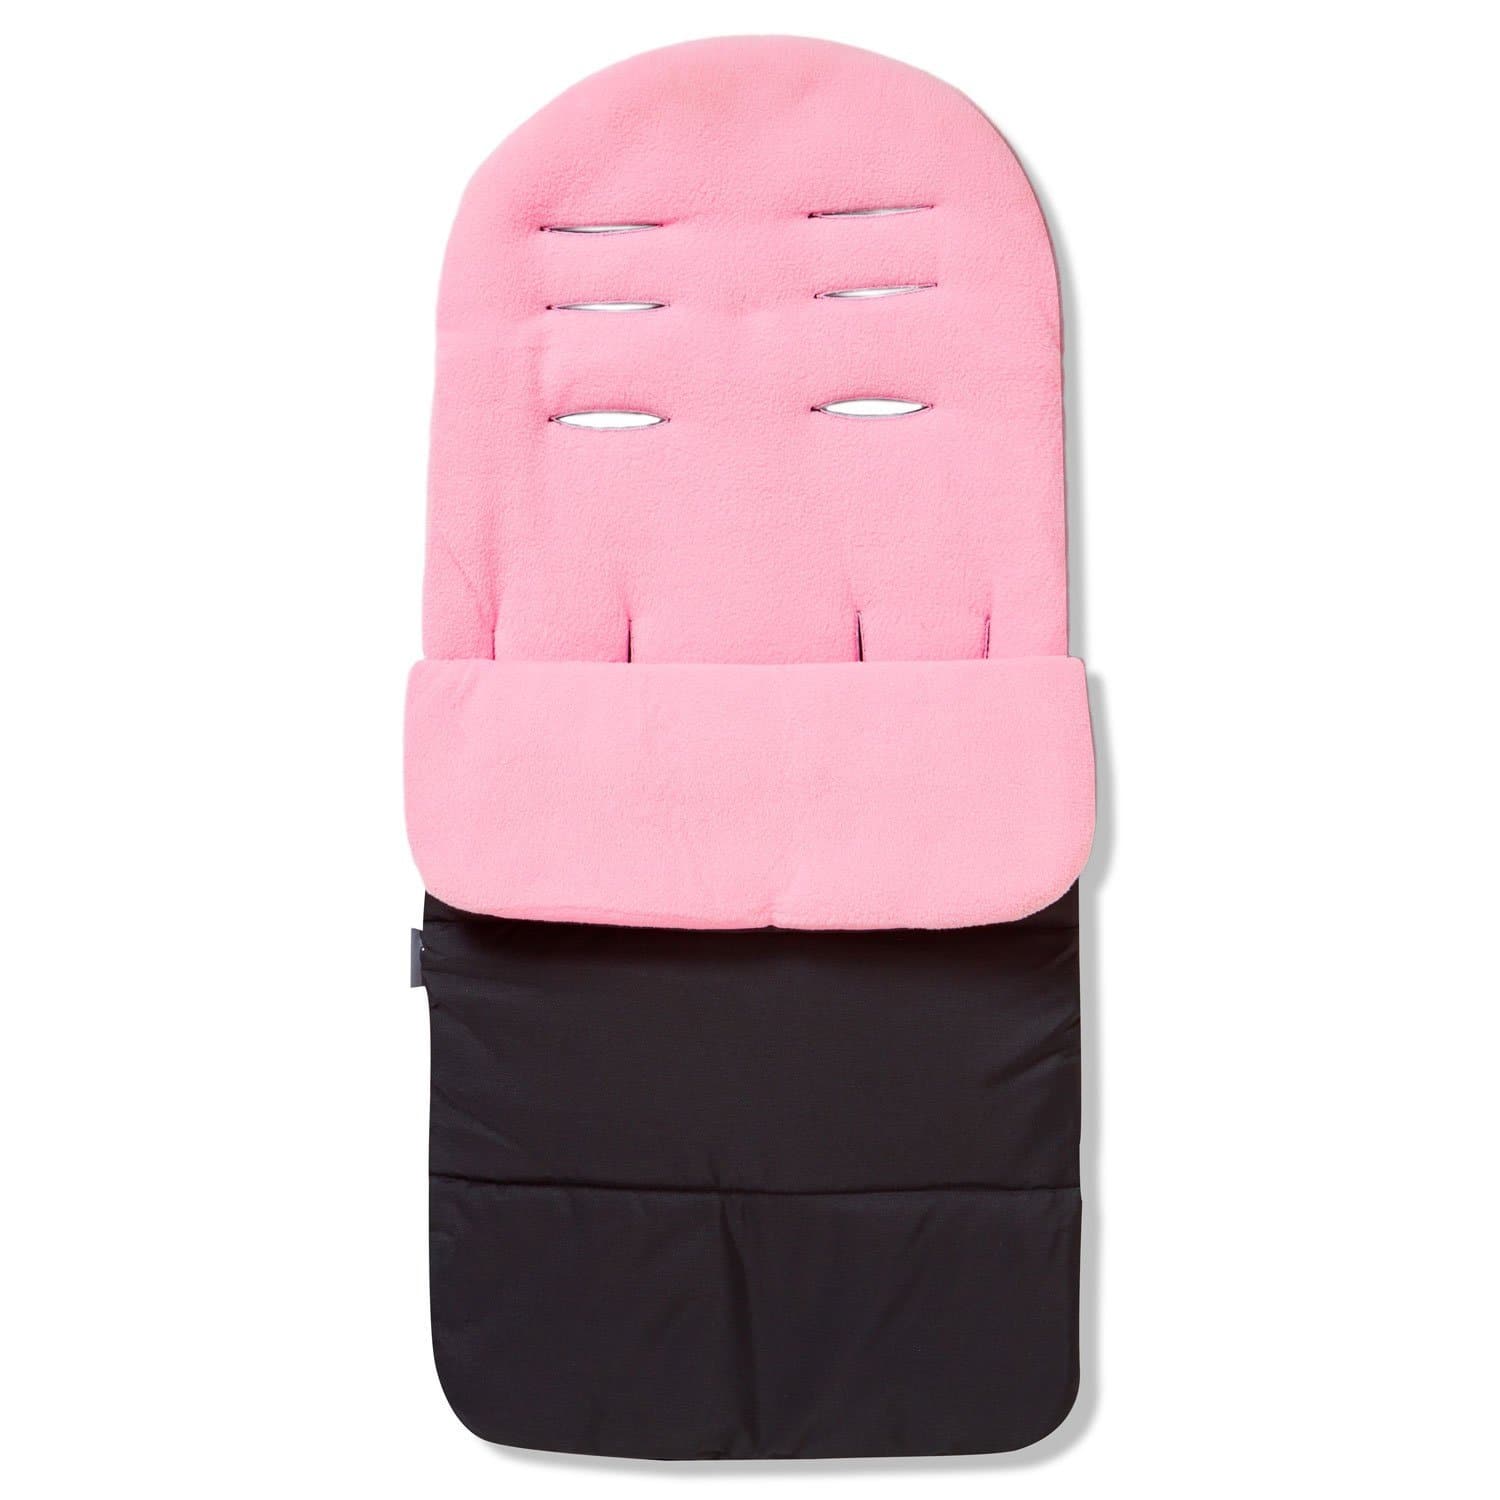 Premium Footmuff / Cosy Toes Compatible with Bugaboo - Candy Pink / Fits All Models | For Your Little One